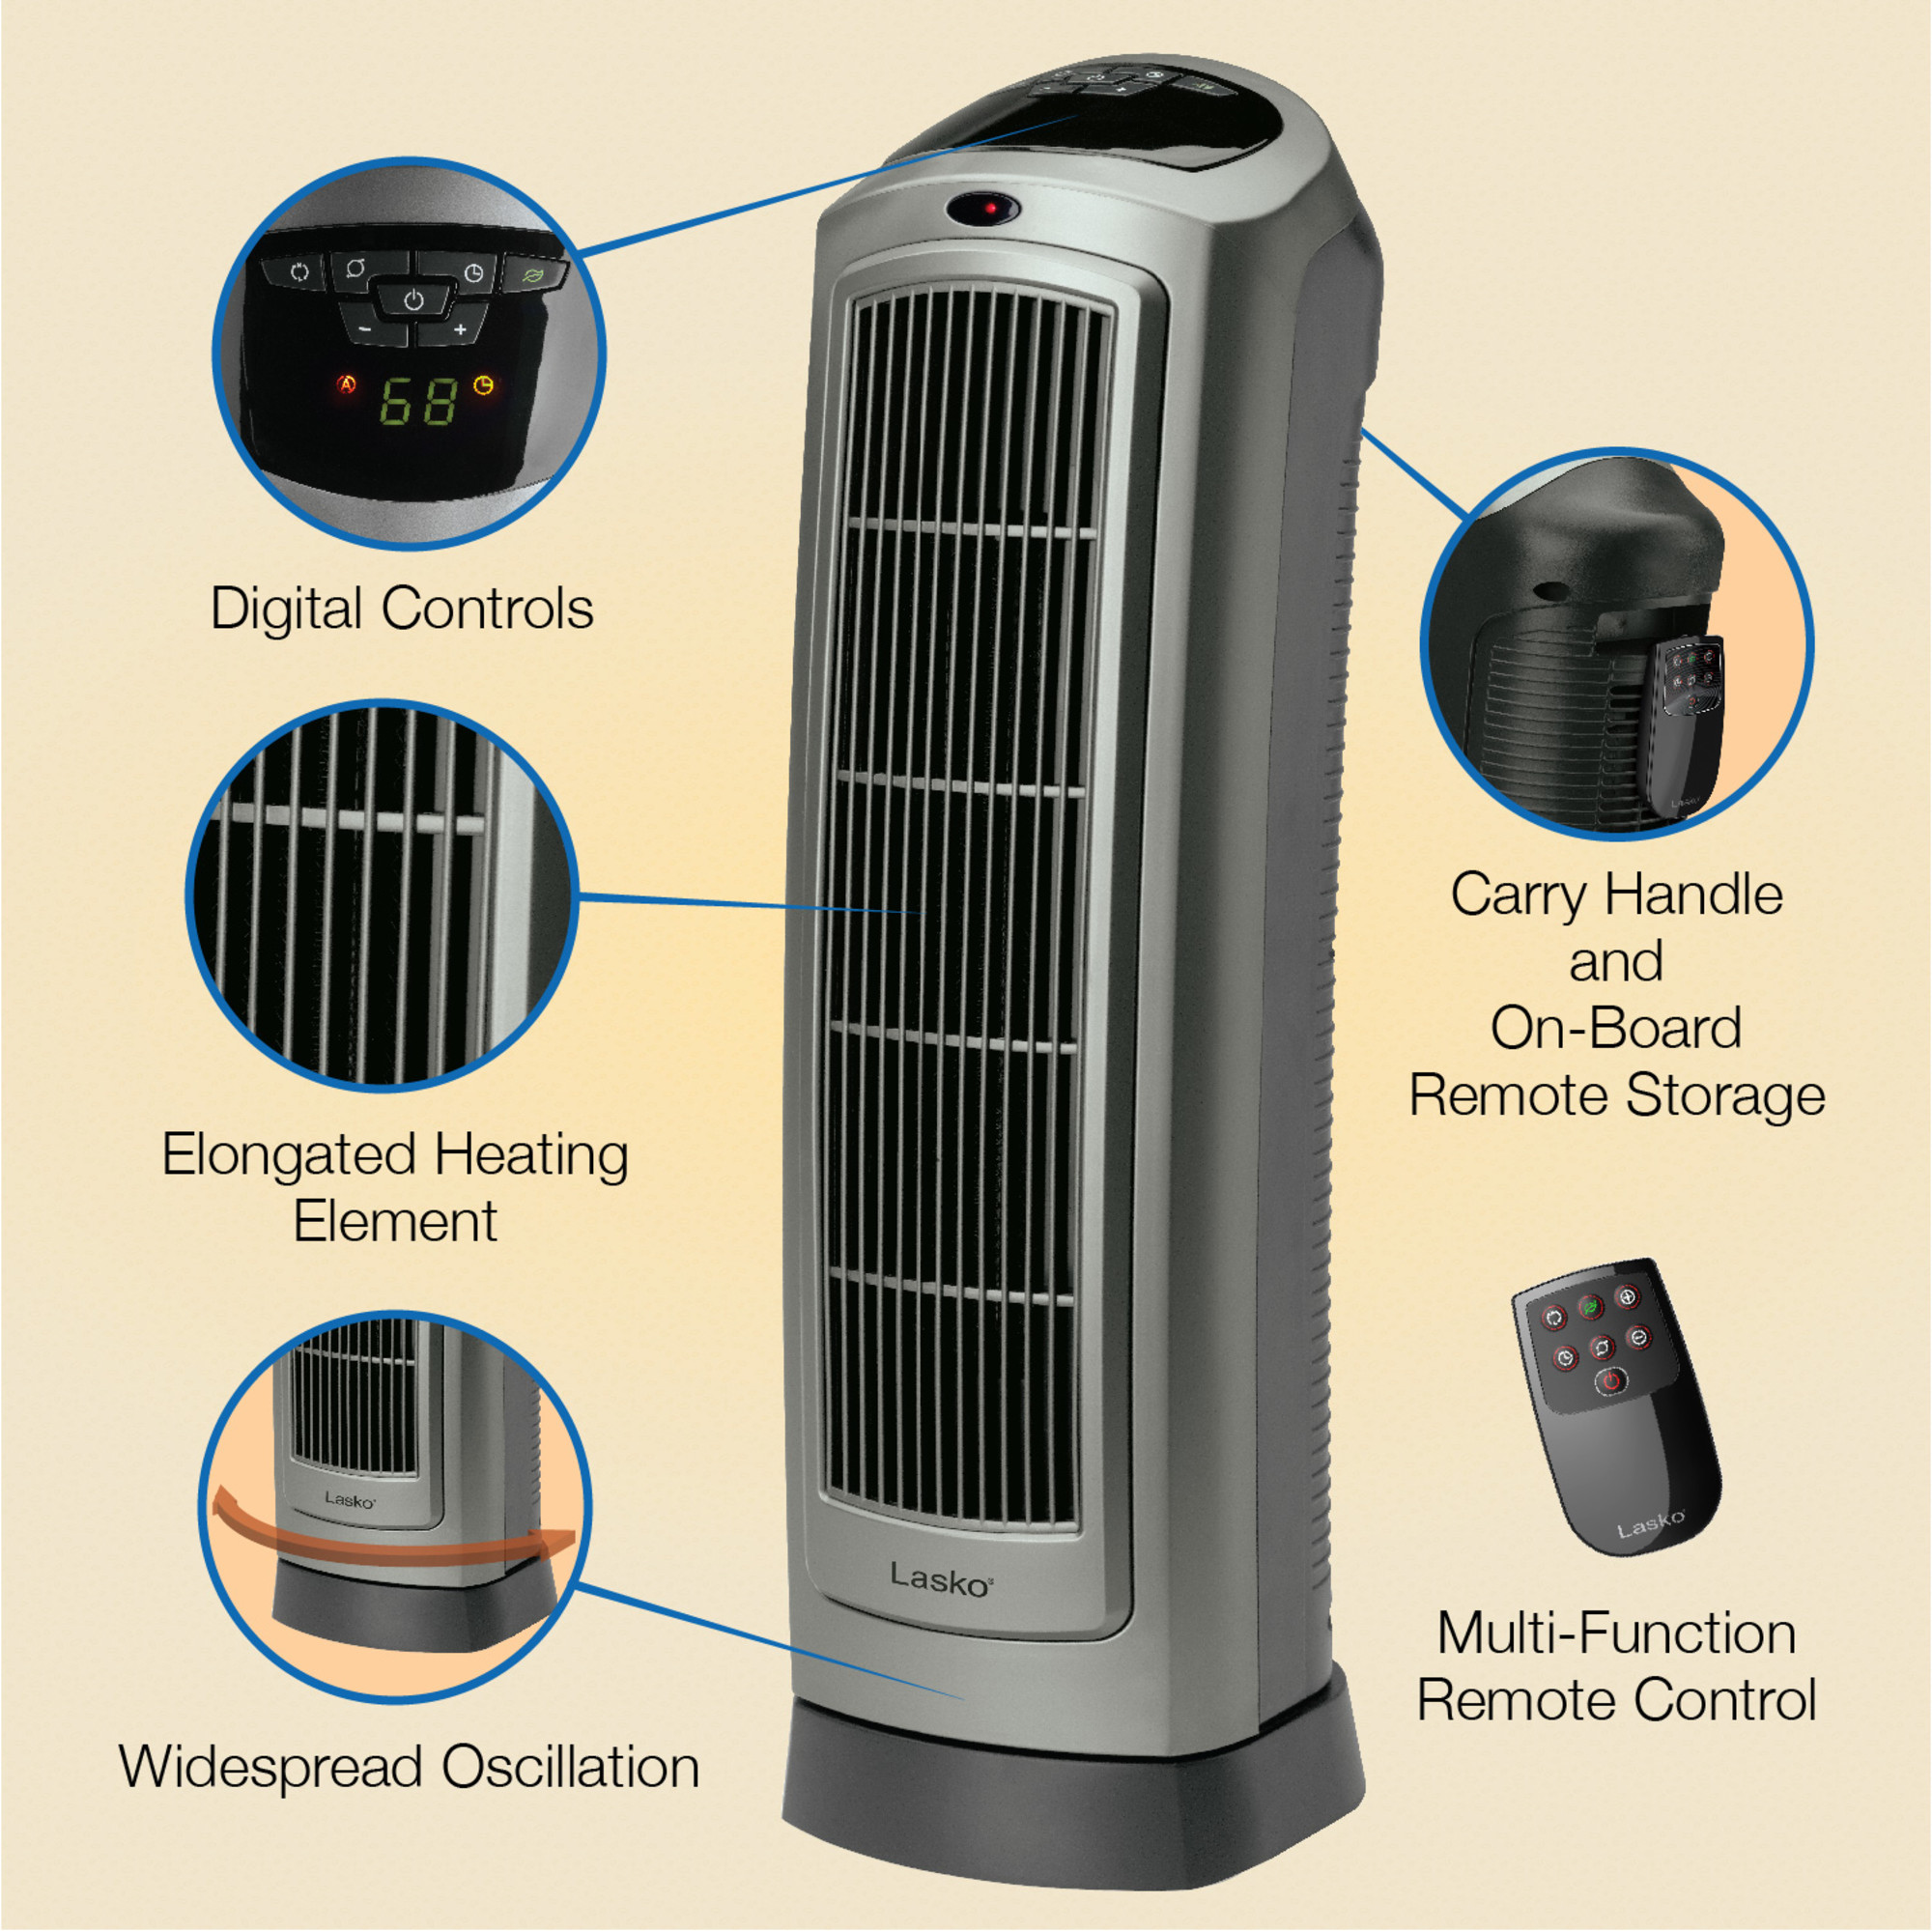 Lasko 22.2" 1500W Oscillating Ceramic Electric Tower Space Heater with Remote, Gray, 5538, New - image 3 of 13